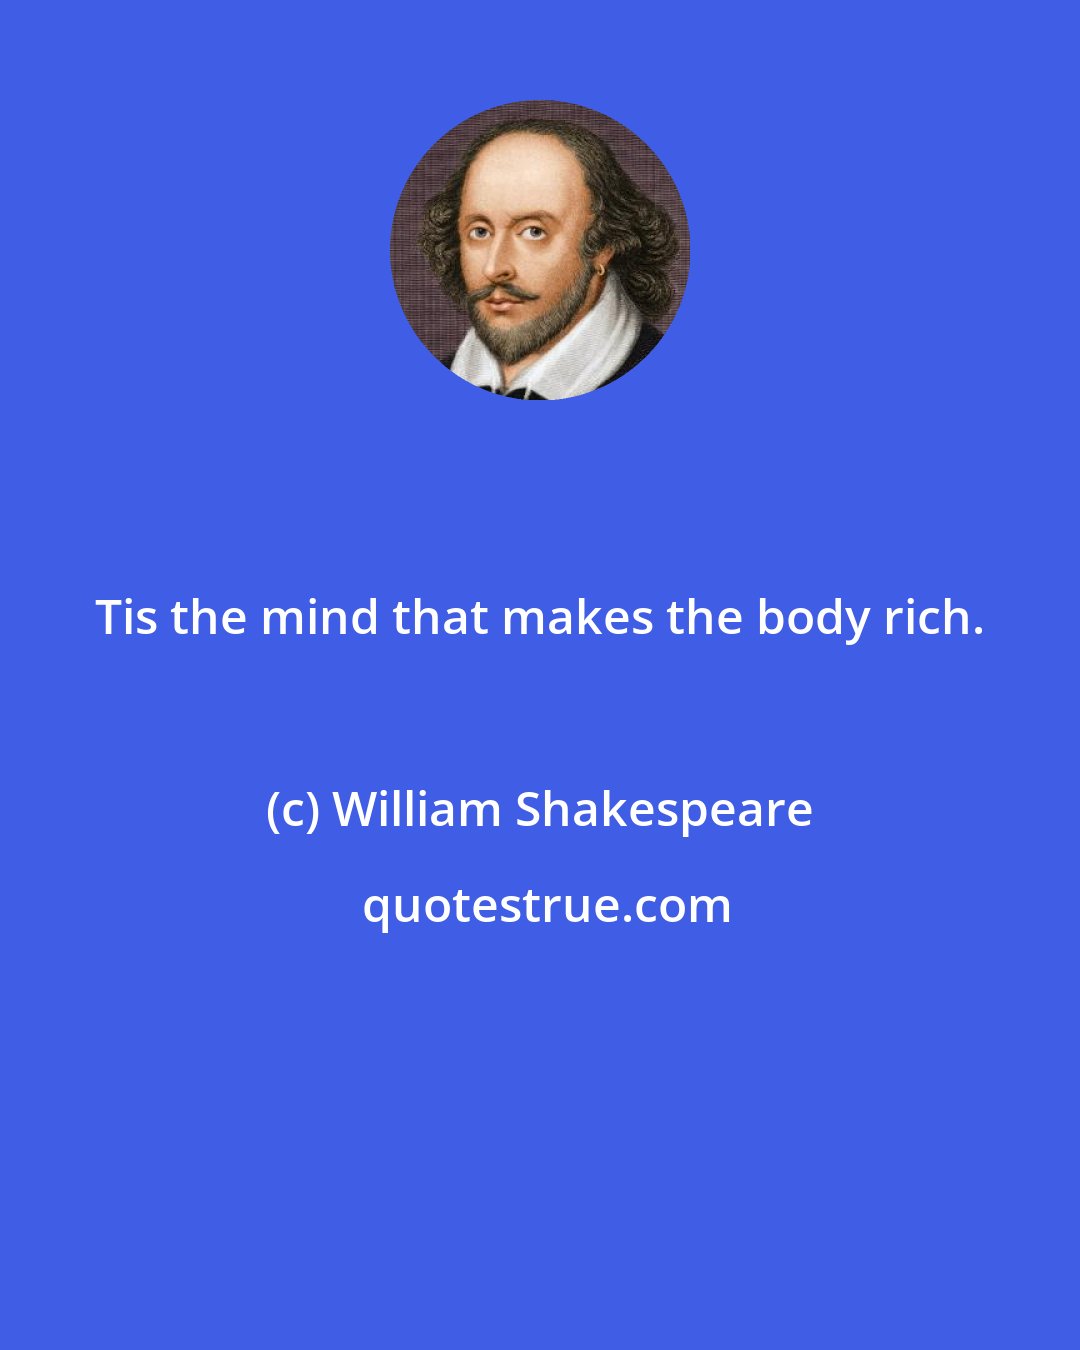 William Shakespeare: Tis the mind that makes the body rich.